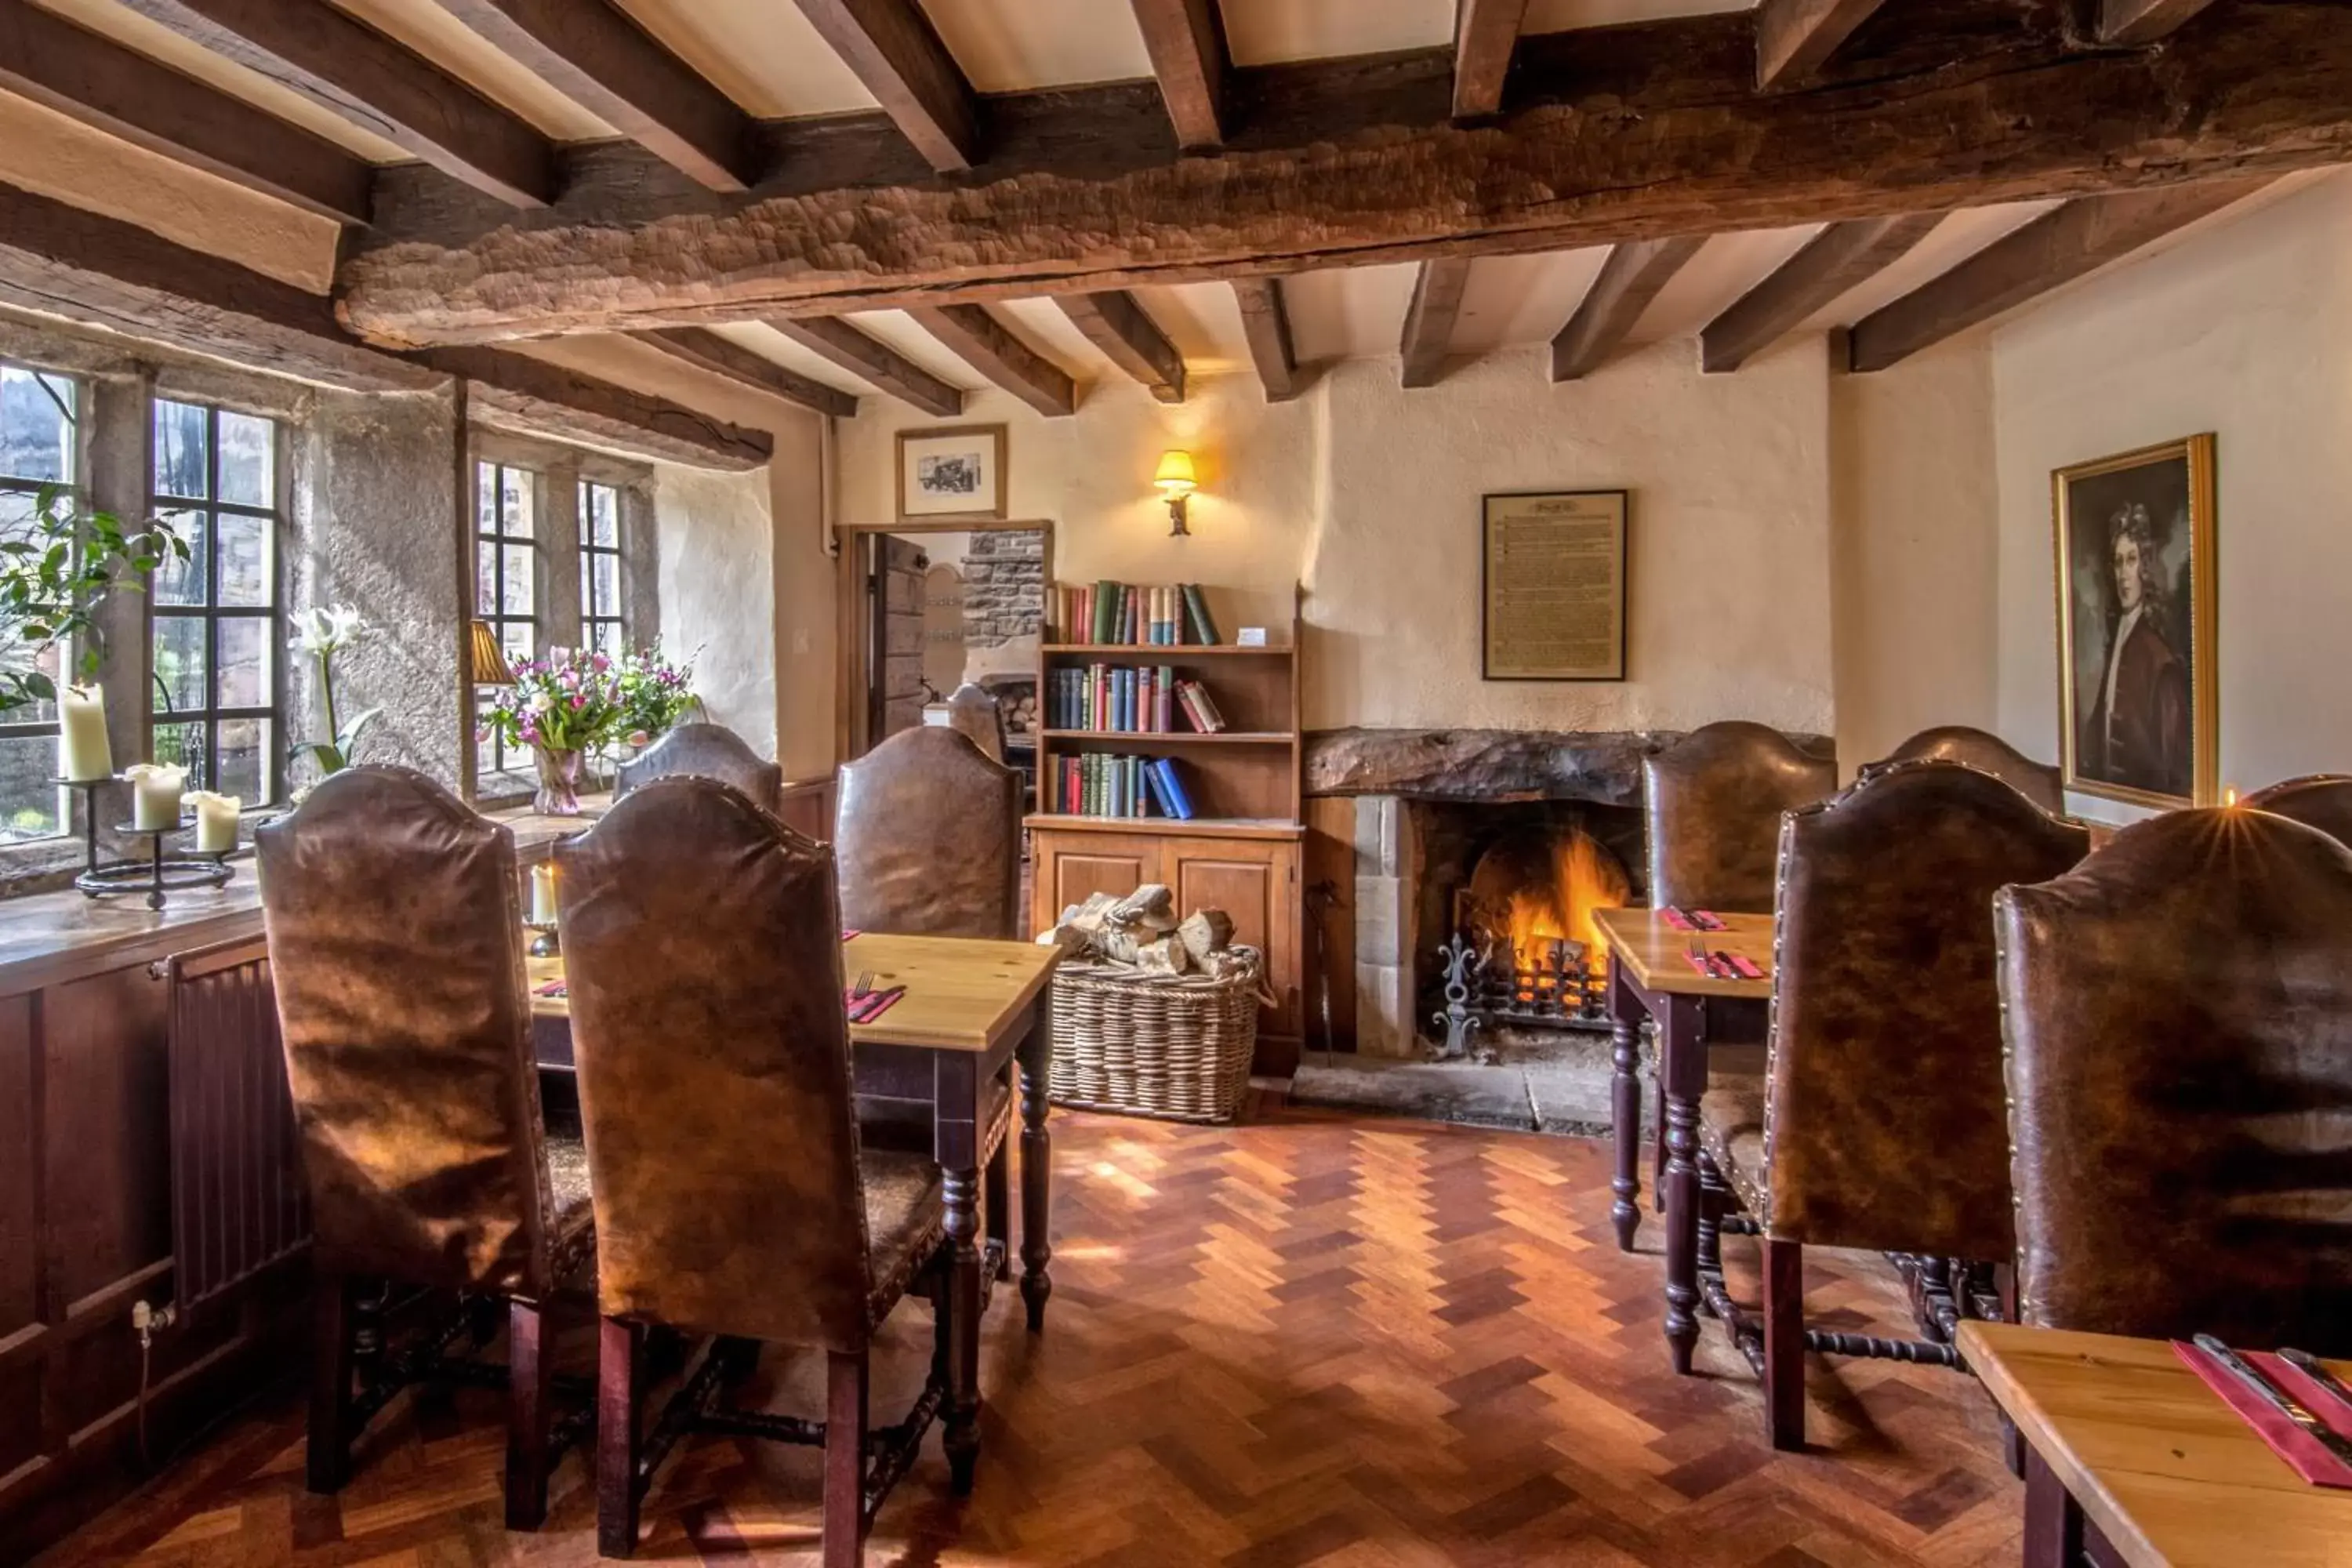 Restaurant/places to eat in The Old Hall Inn